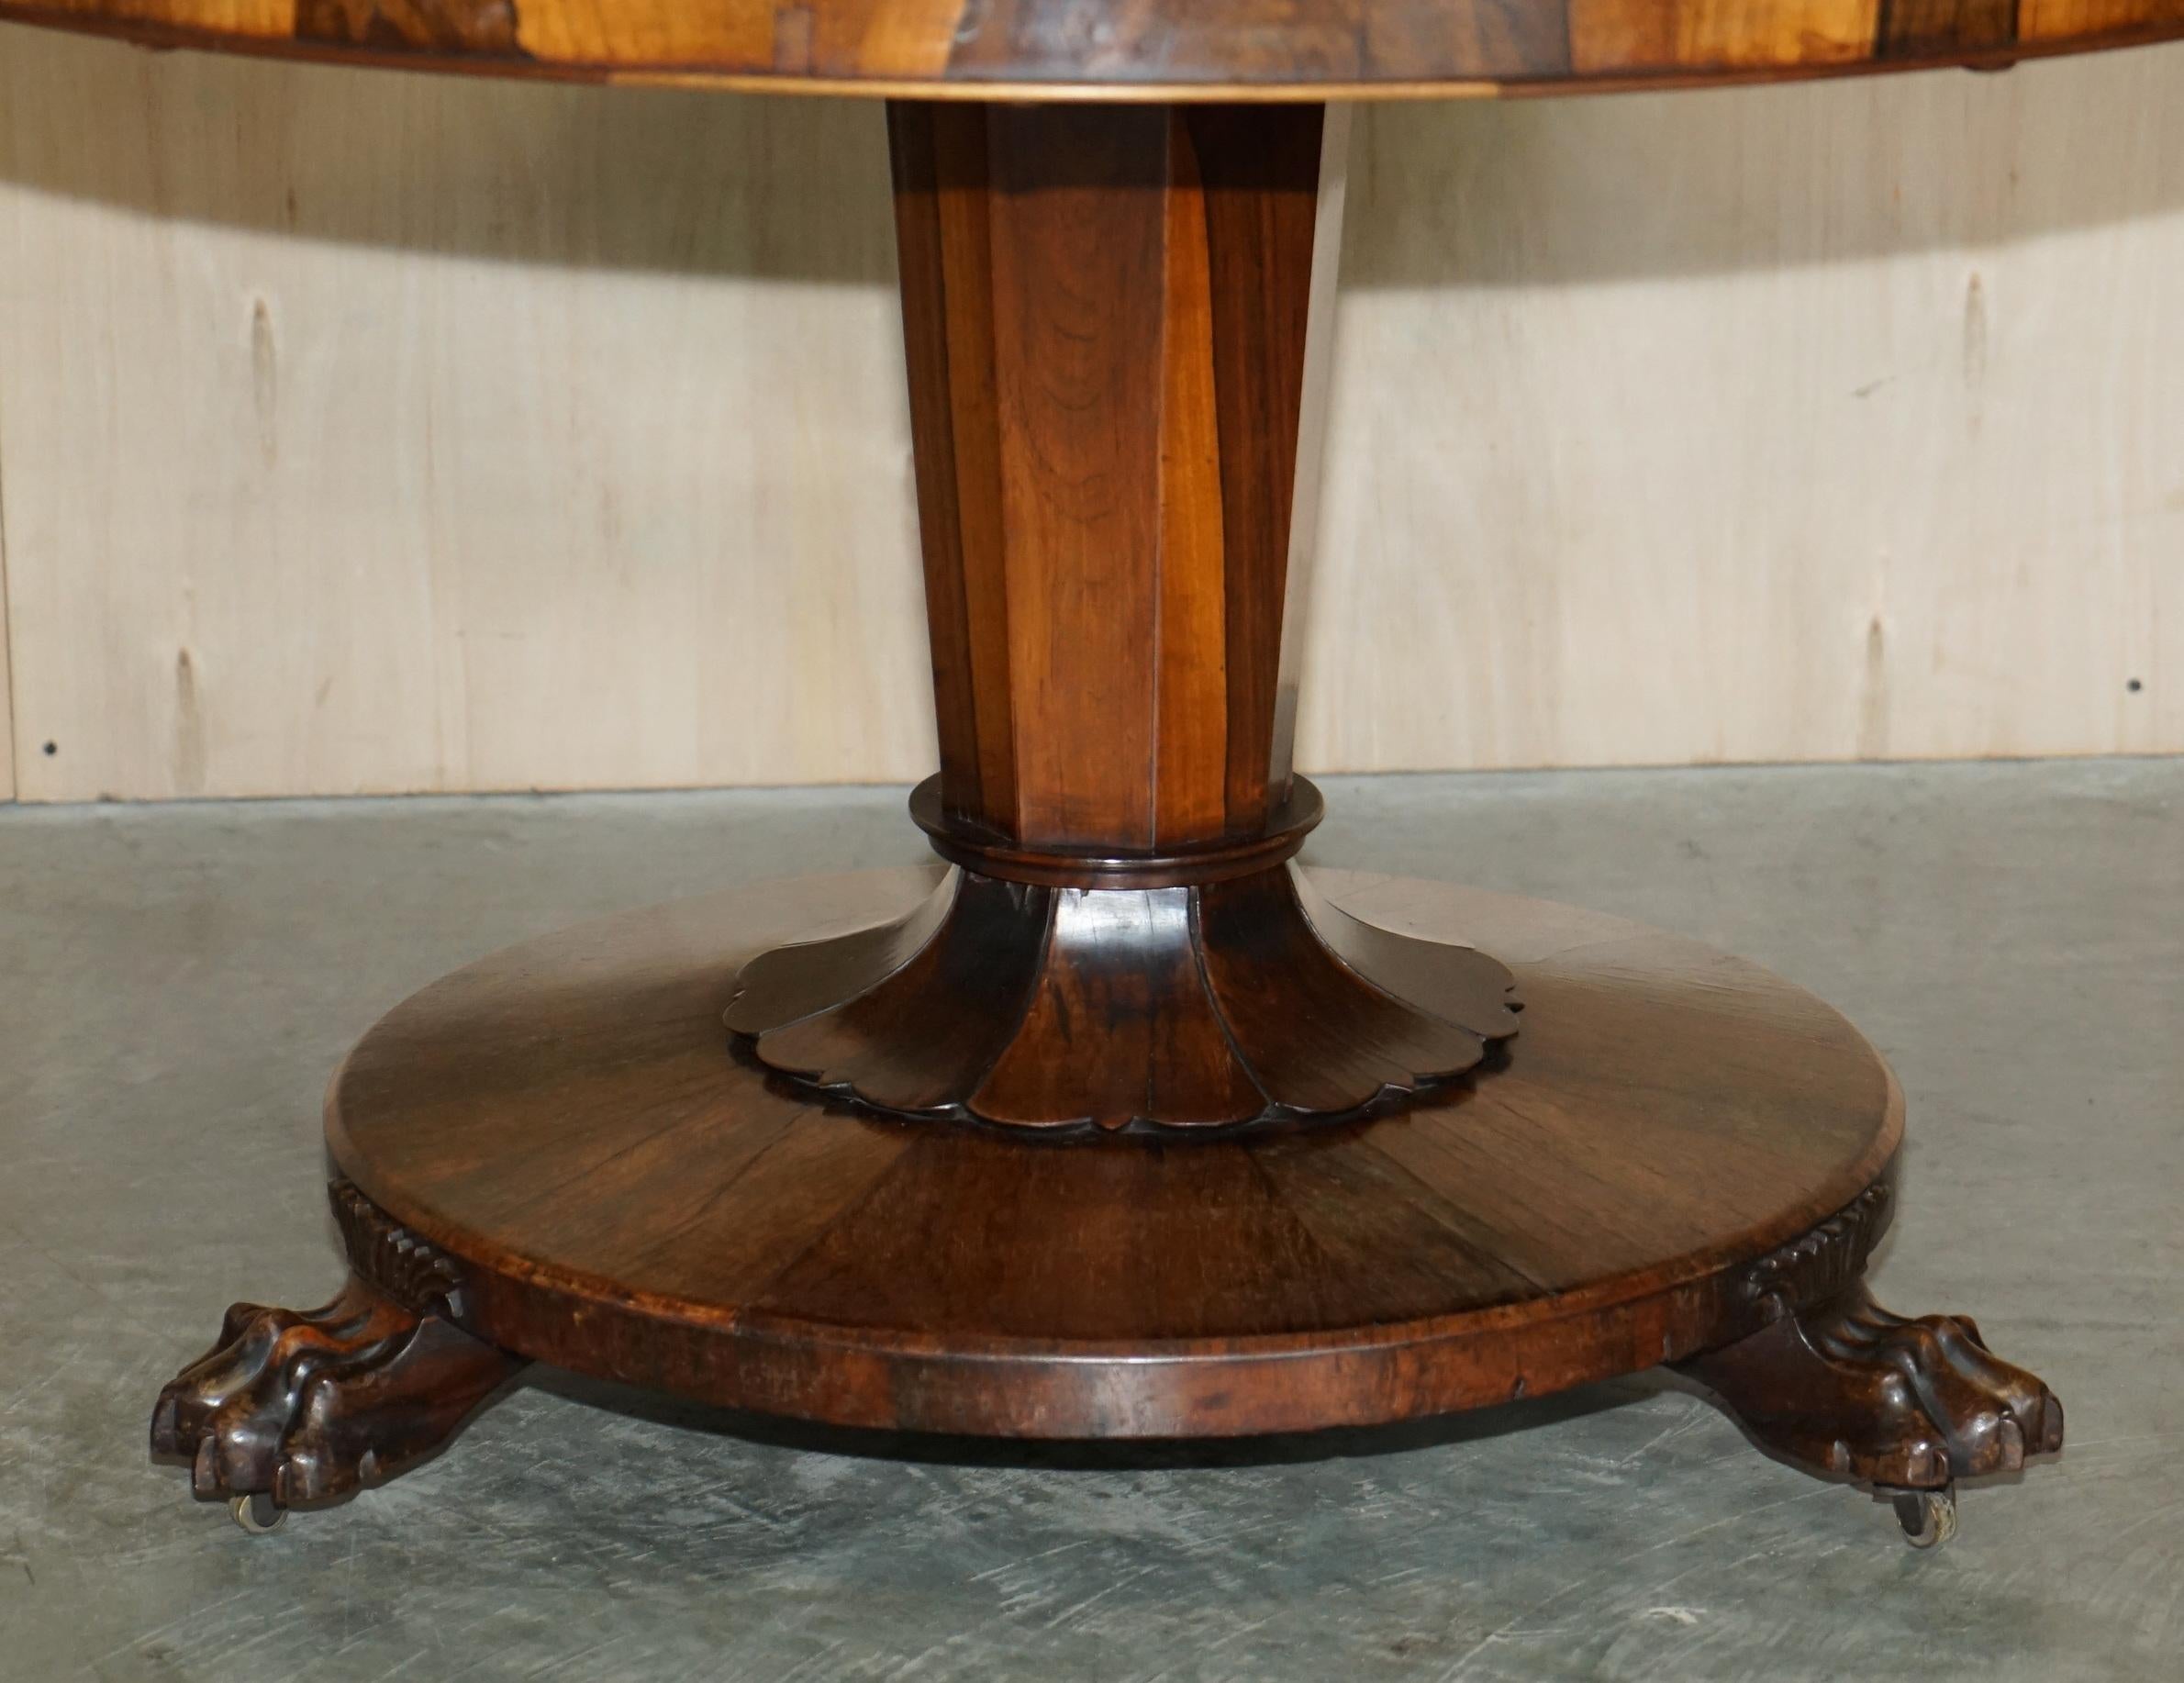 We are delighted to offer for sale this exquisite antique circa 1830 William IV Rosewood centre table

A very good looking and well made antique centre table. This piece is as good and honest as they come, it has the original finish hence some